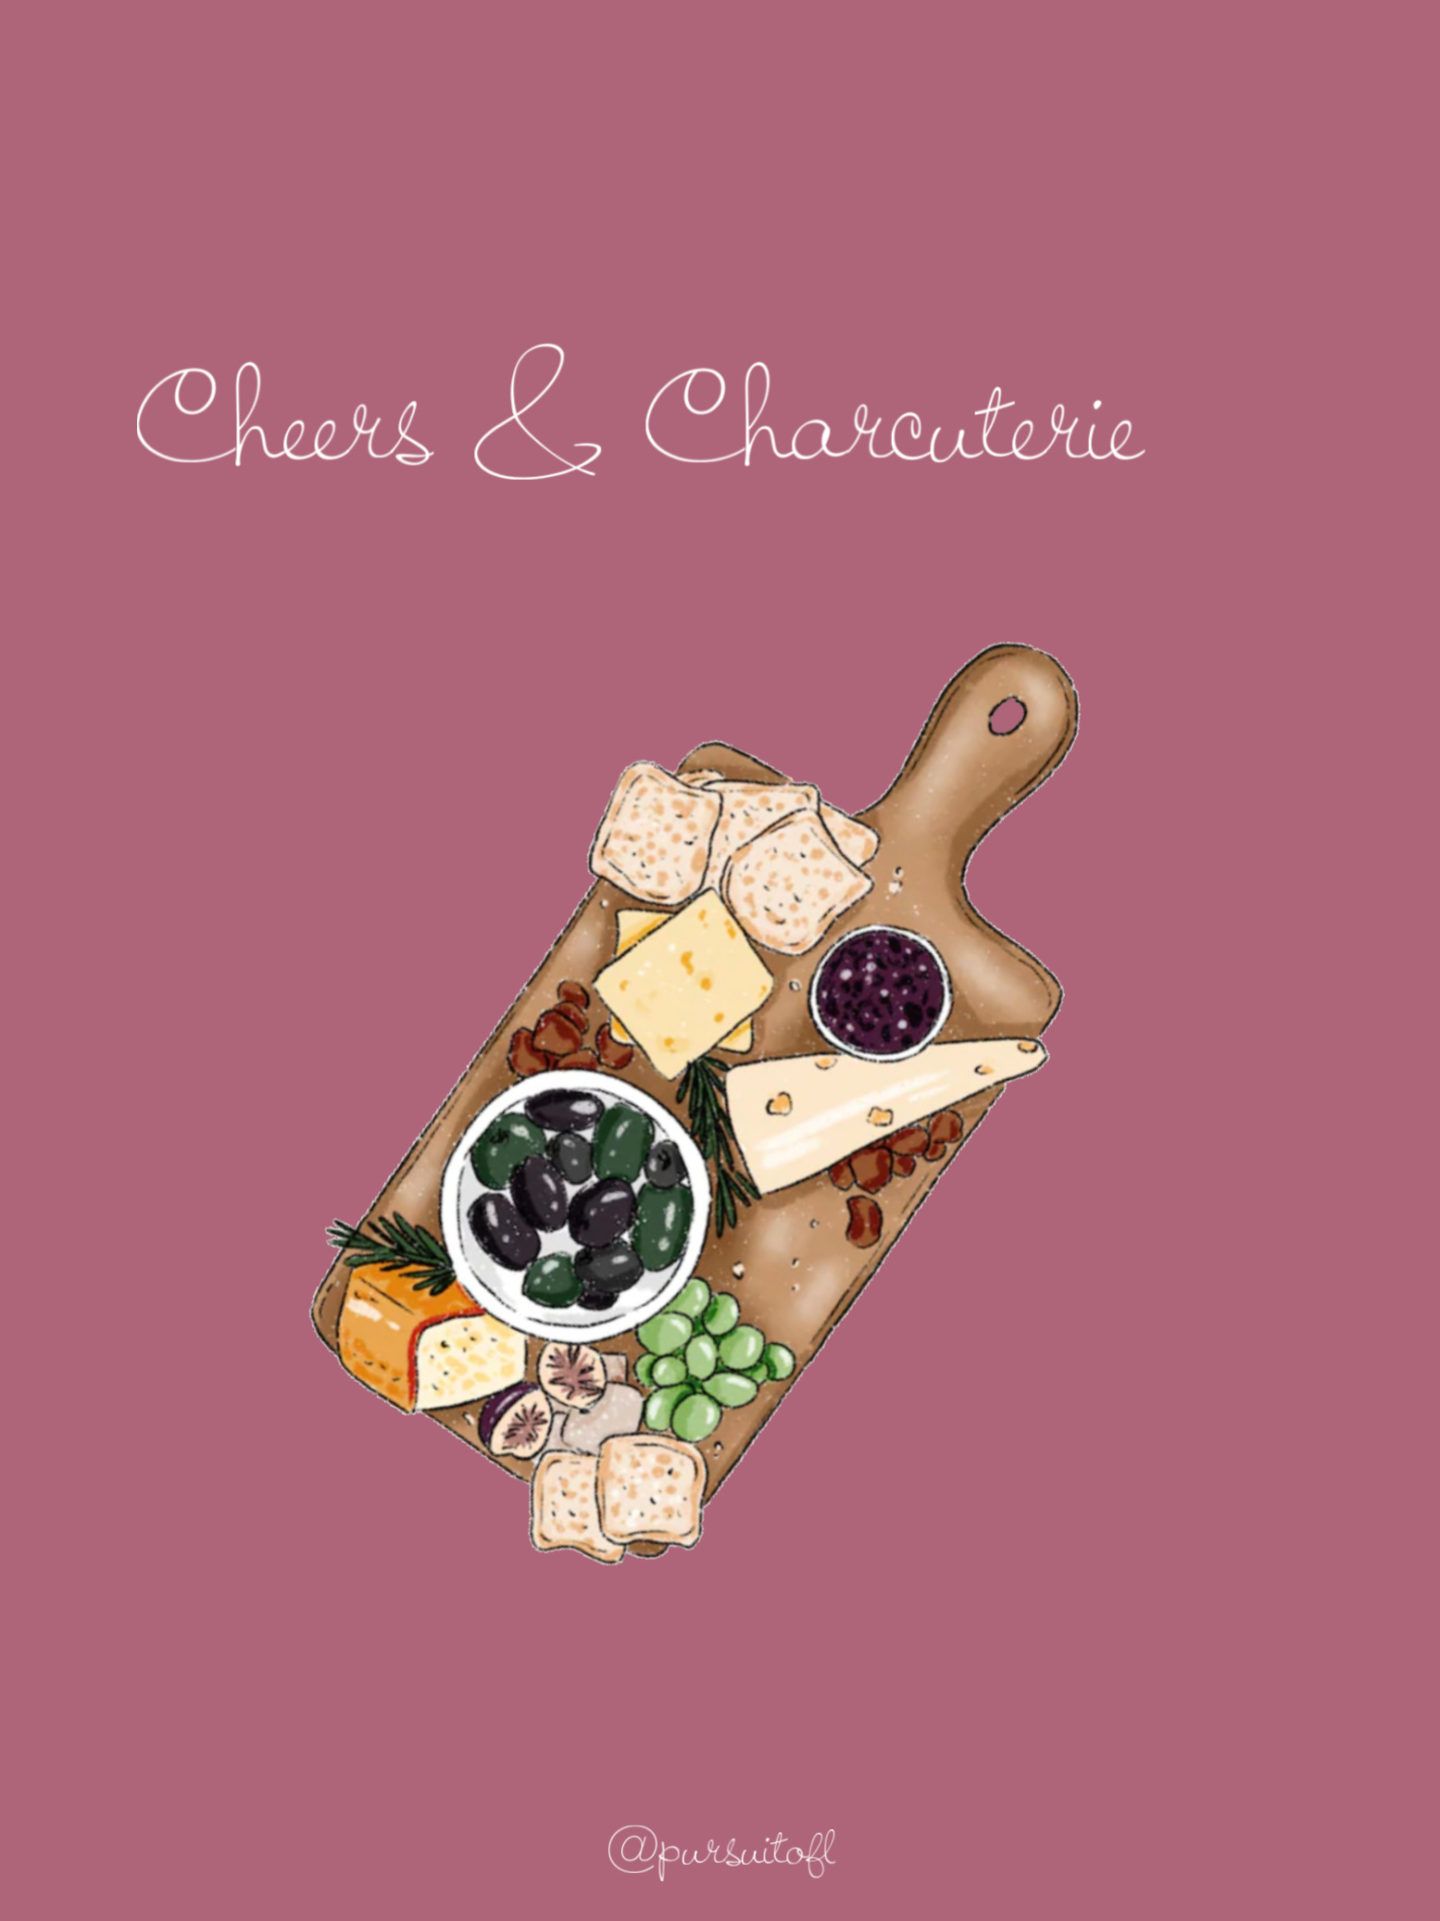 Mauve tablet wallpaper with charcuterie board illustration and Cheers & Charcuterie text